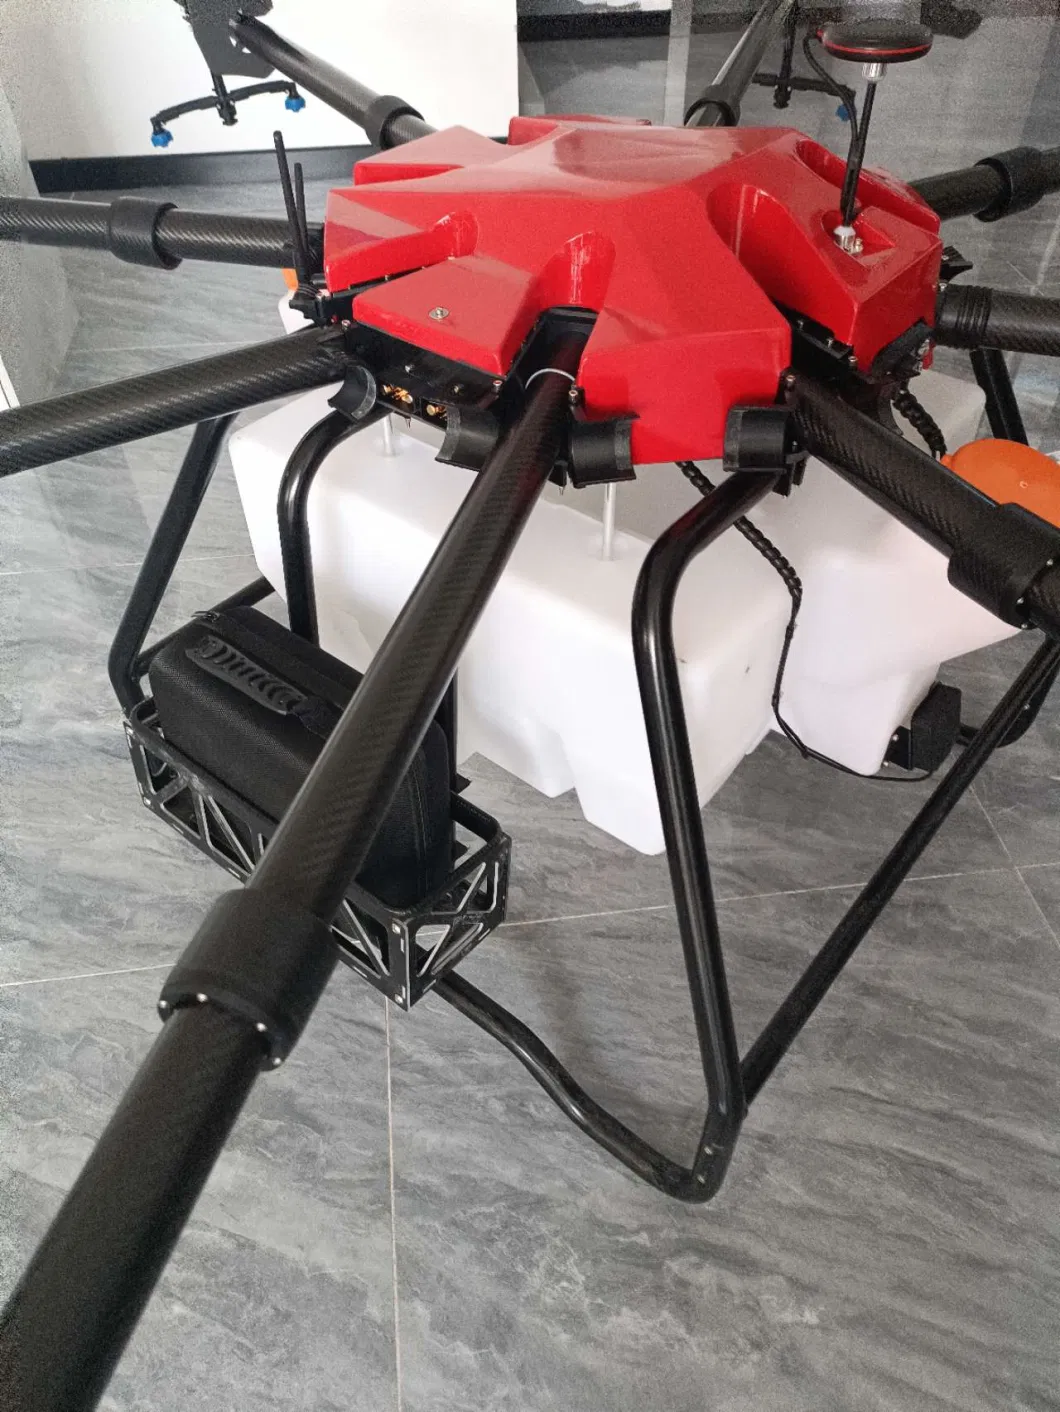 20-72 L Uav Drones Battery Electric Agriculture Drone Sprayer Equipped with Precision Instruments